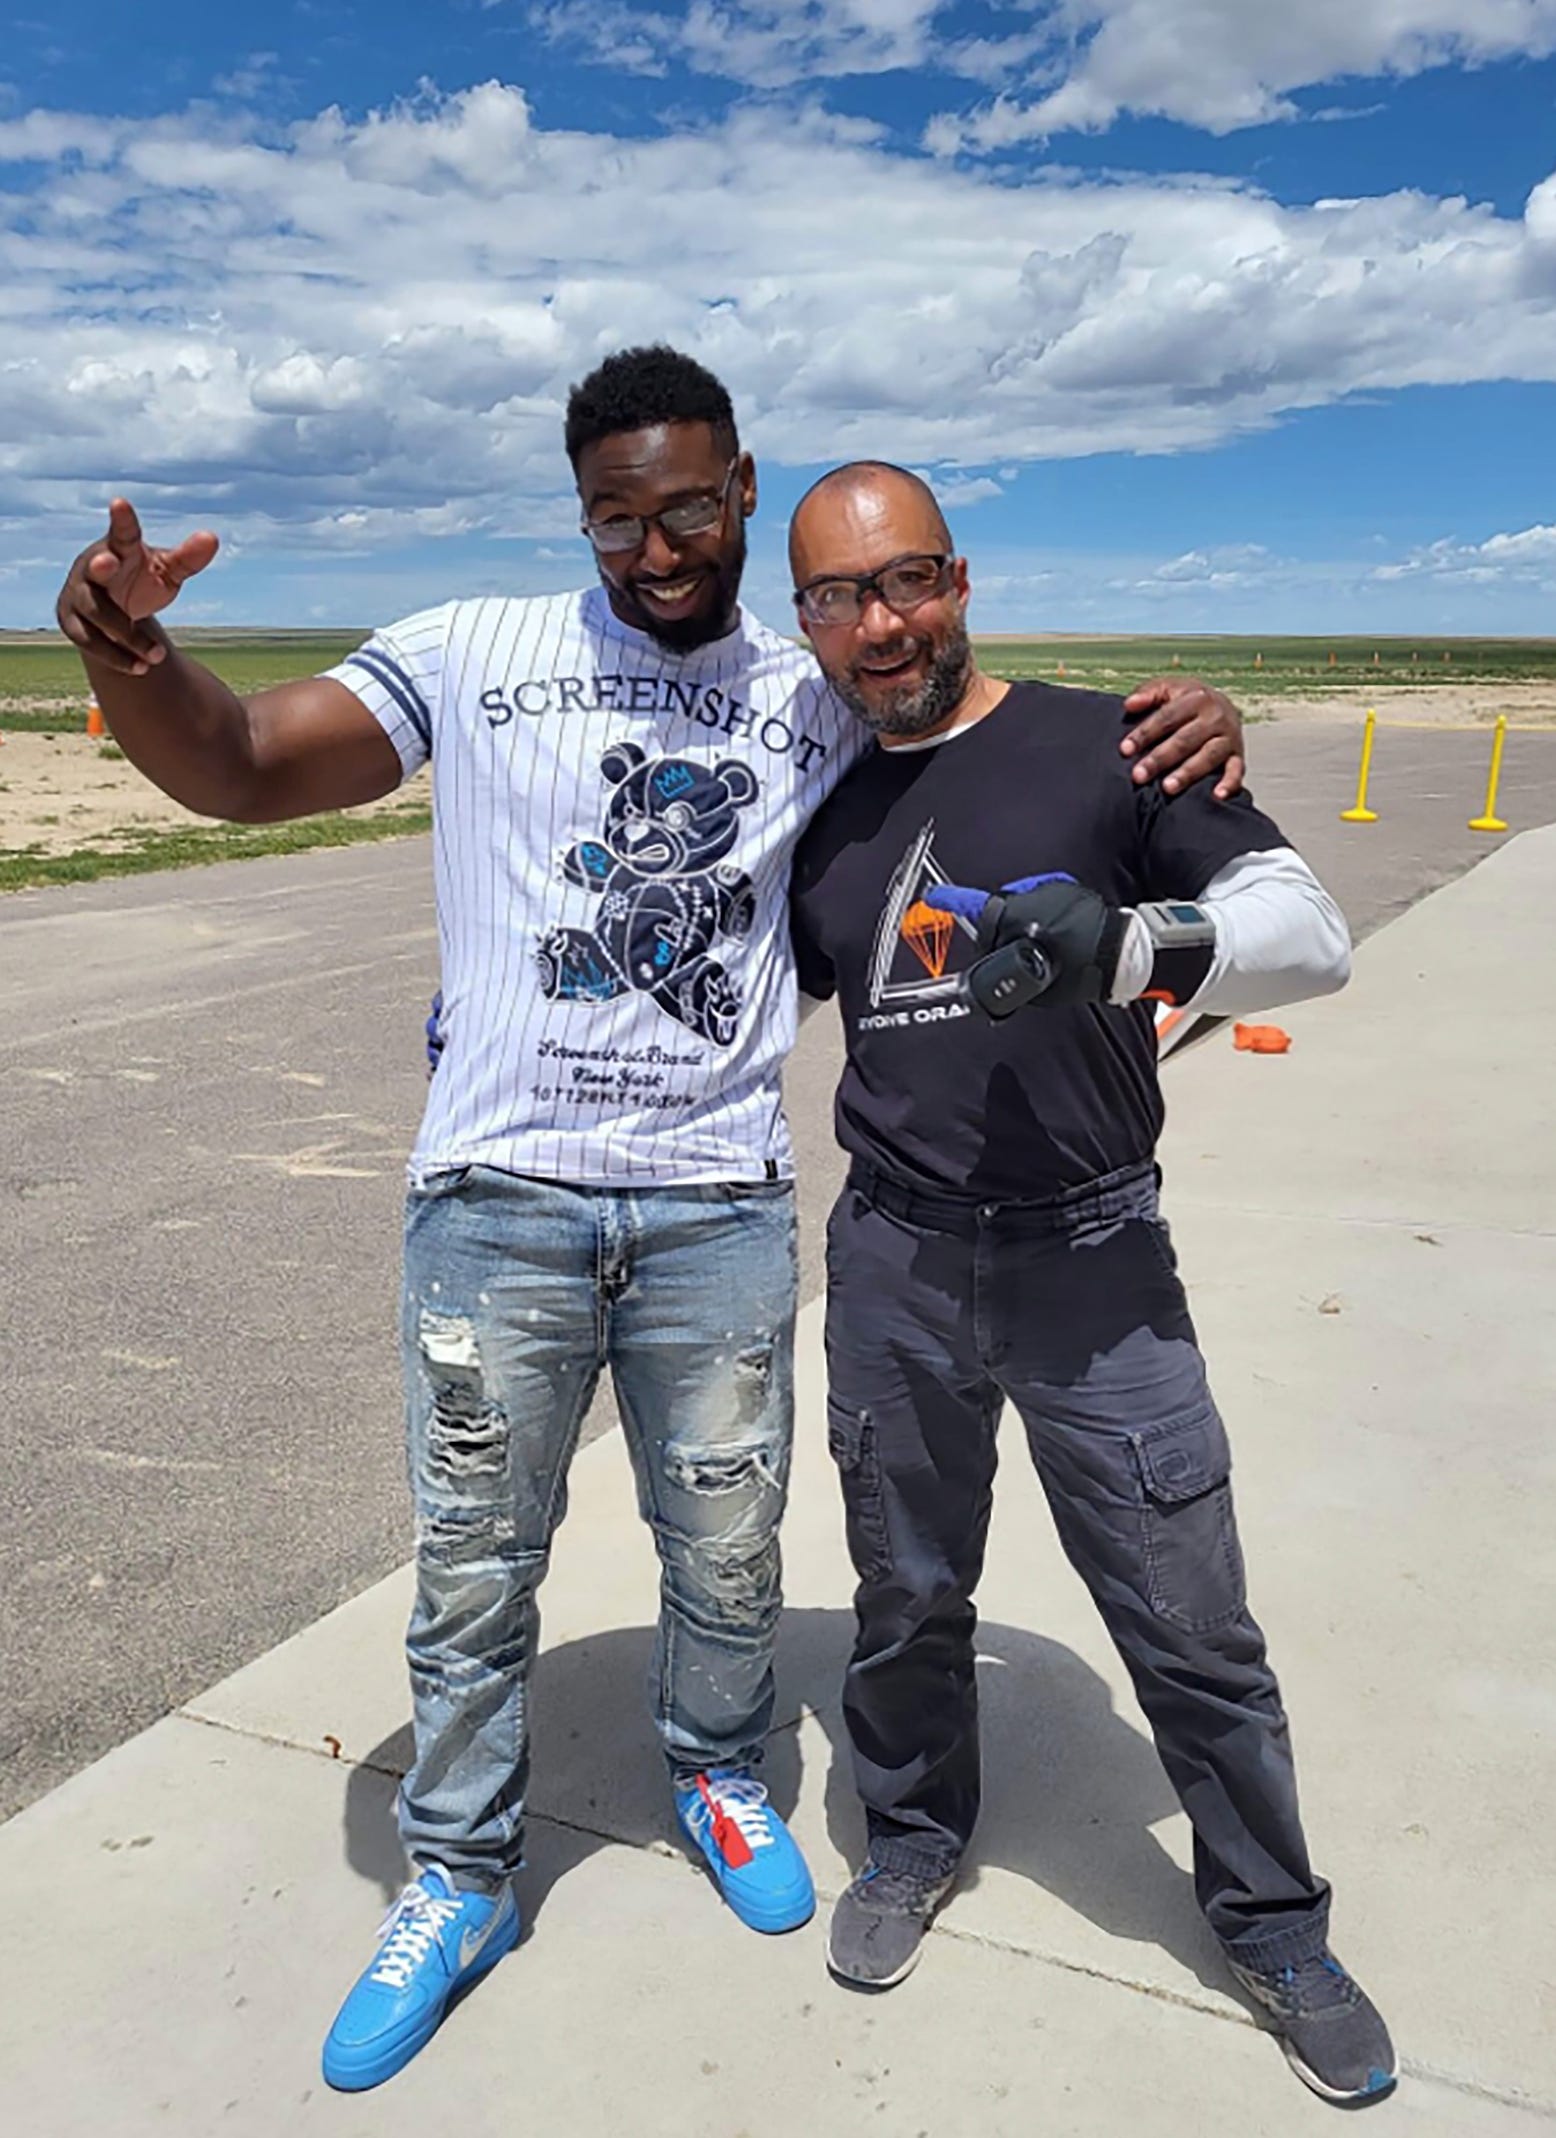 Marlin Dixon, left, poses with his skydiving instructor after jumping from a plane in Colorado in June. Dixon who went to Denver to visit Vicki Conte, his friend and supporter.